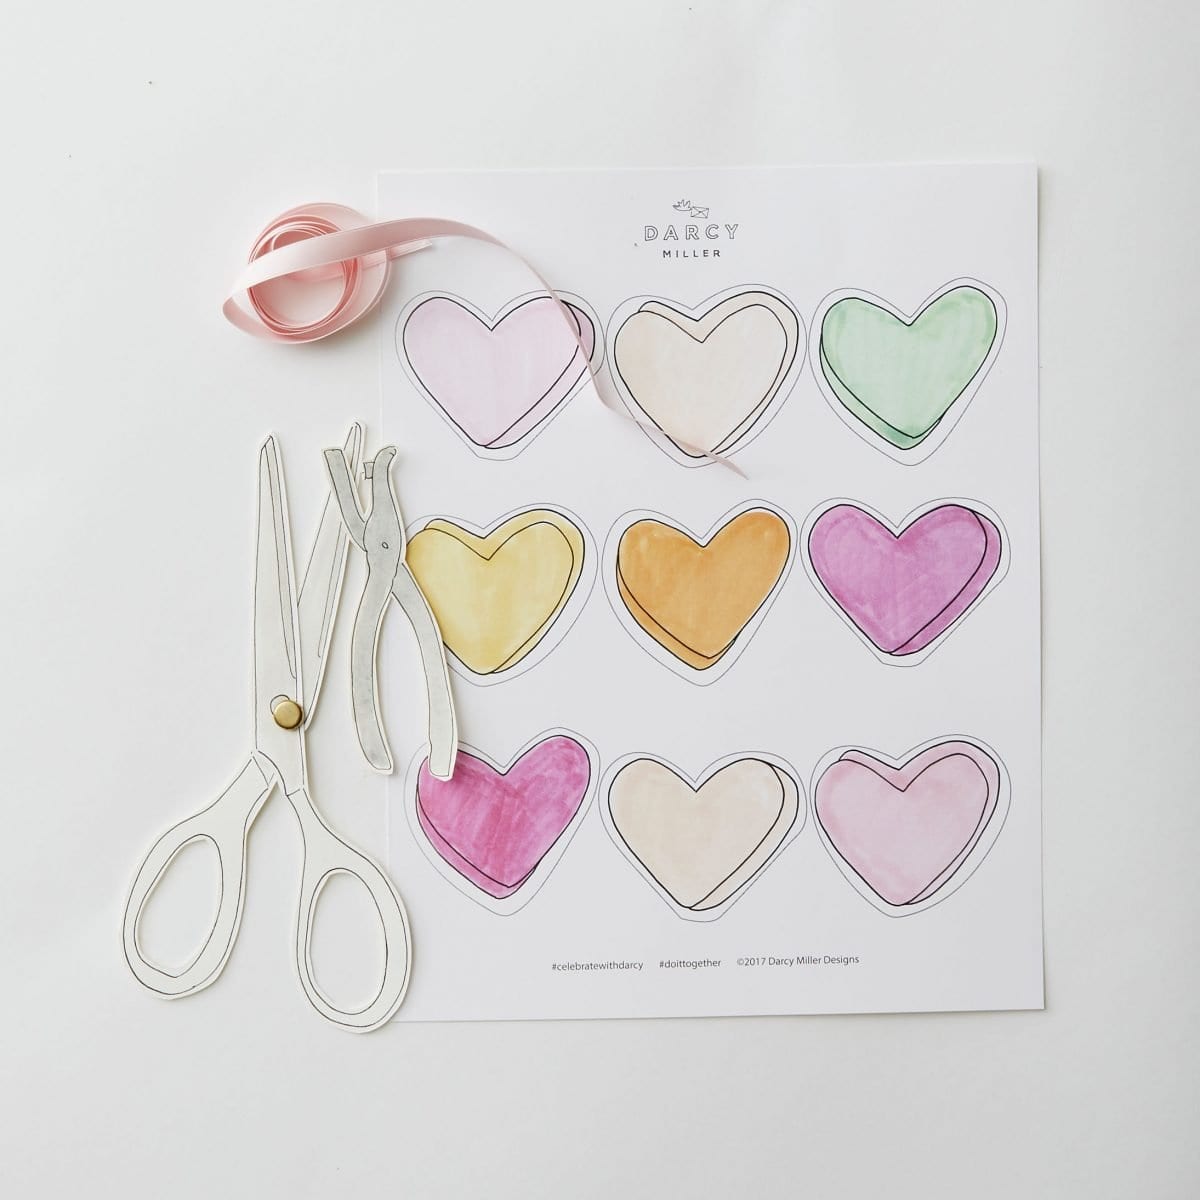 Darcy Miller Designs, Valentines, love note, conversation heart, paper heart, candy heart, good morning sweetie, have a good day, easy, Darcy Miller, DIY